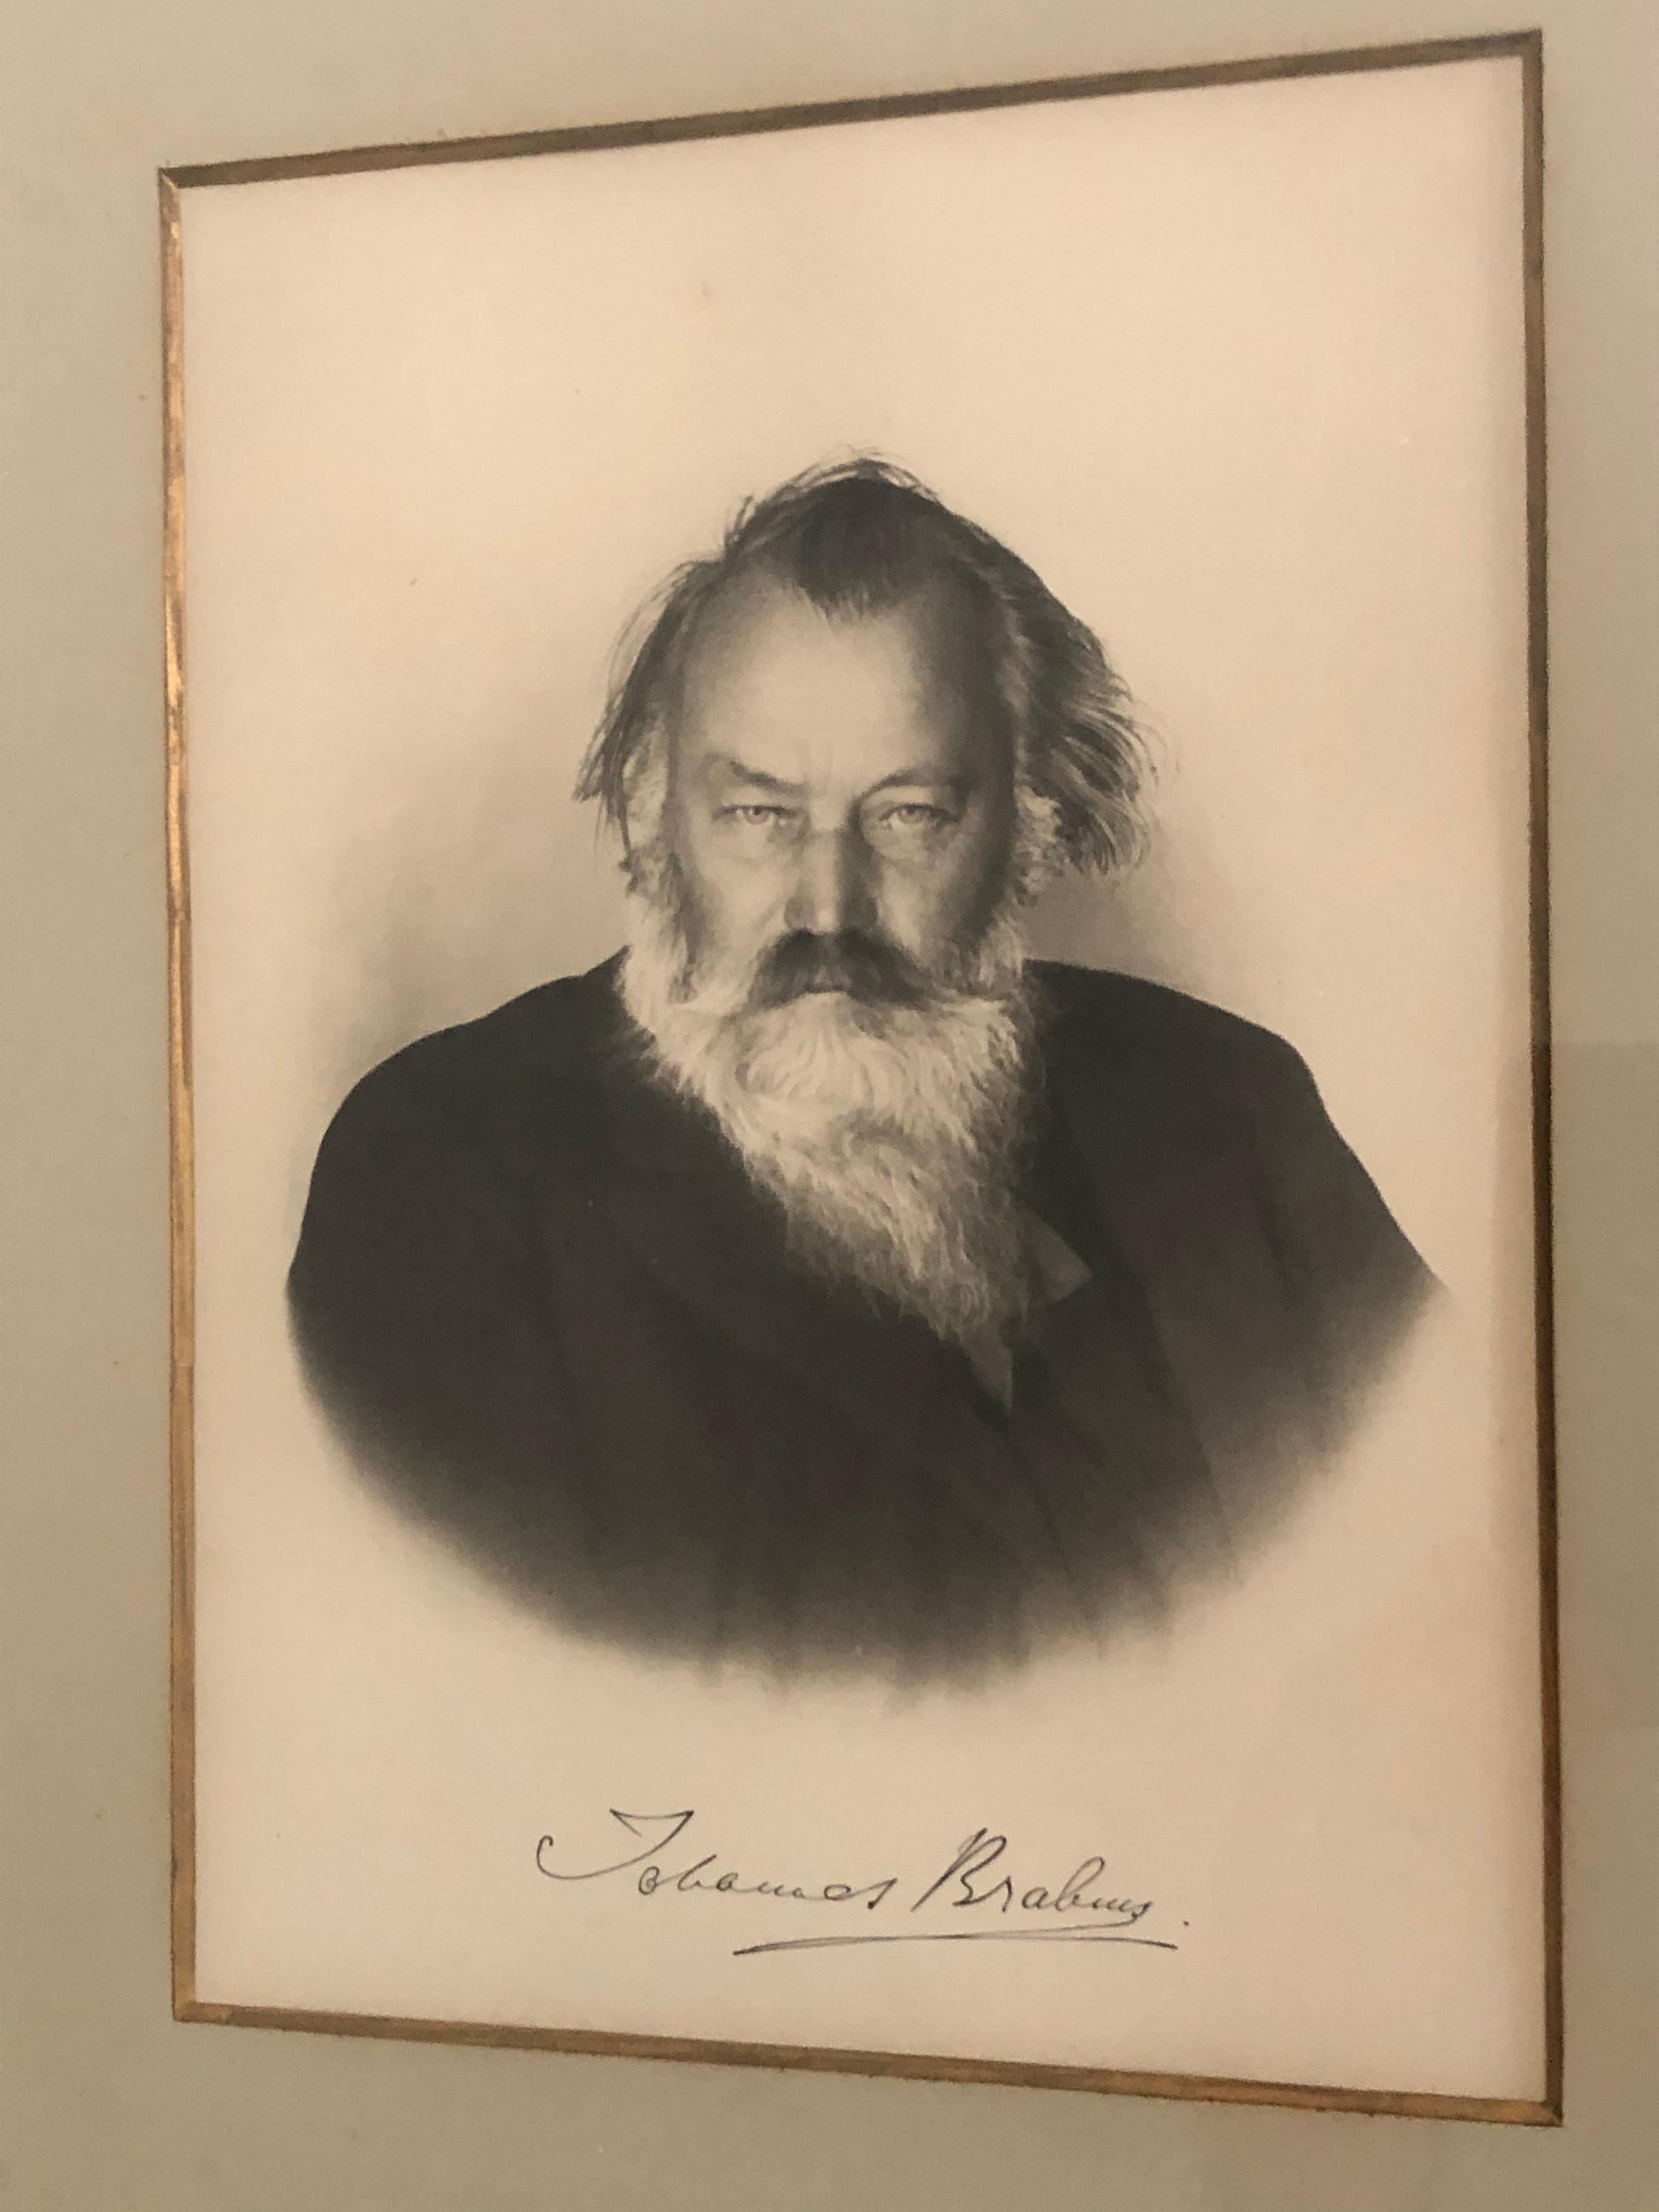 johannes brahms influenced by